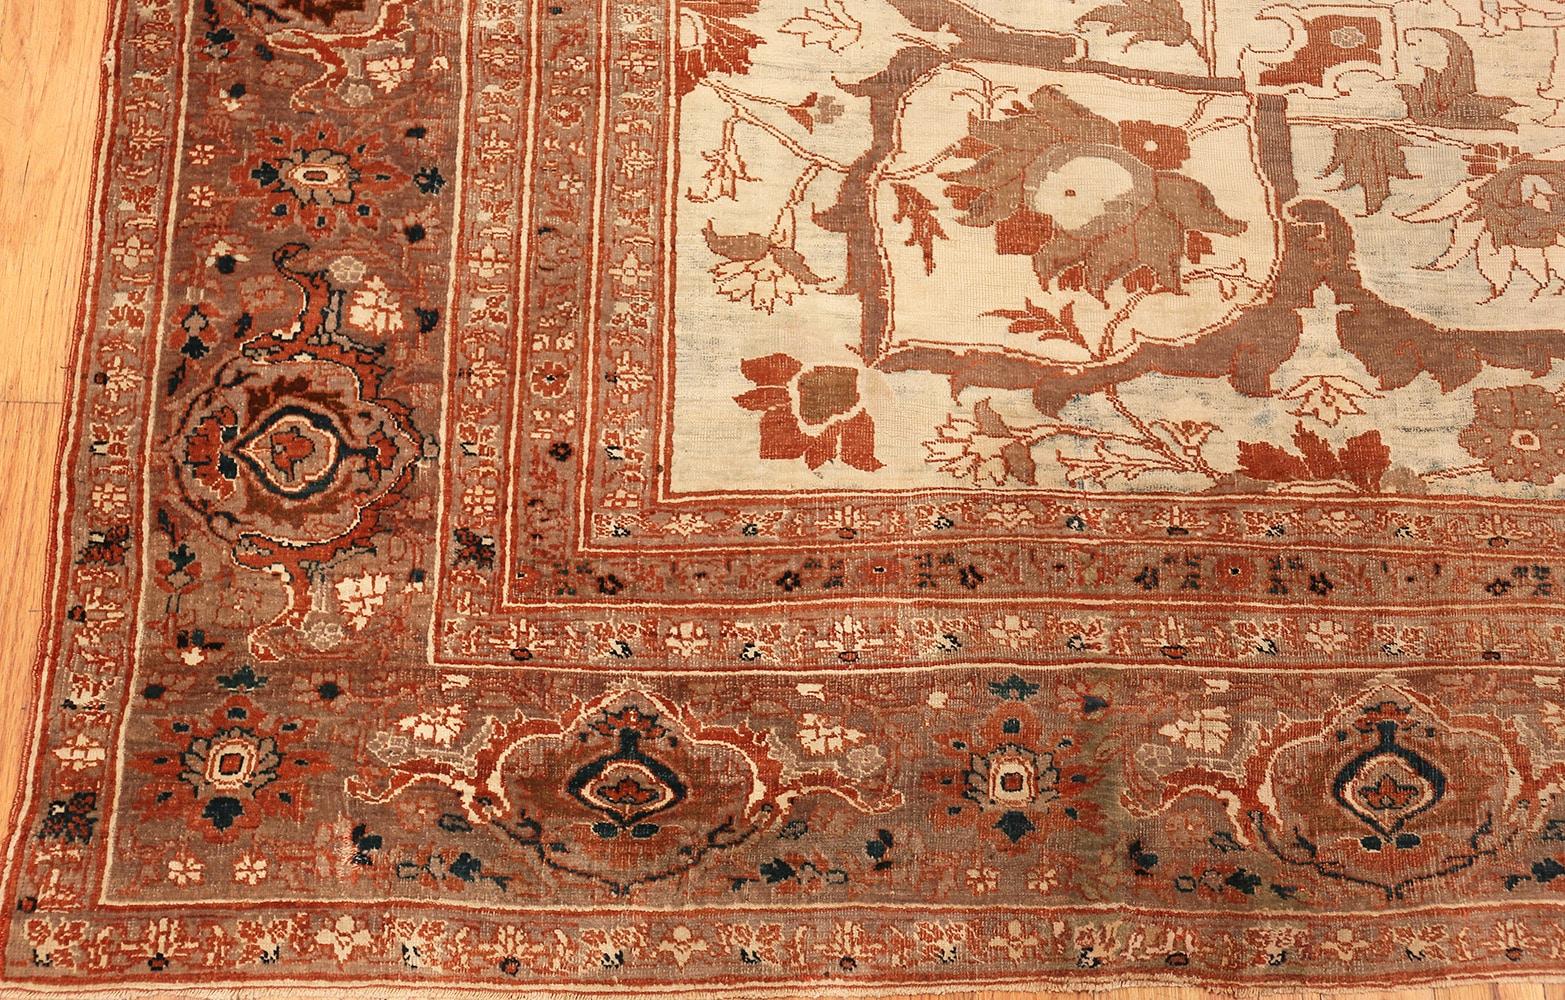 Hand-Knotted Rare Cotton and Wool Antique Persian Tabriz Rug. Size: 10 ft 3 in x 14 ft 10 in